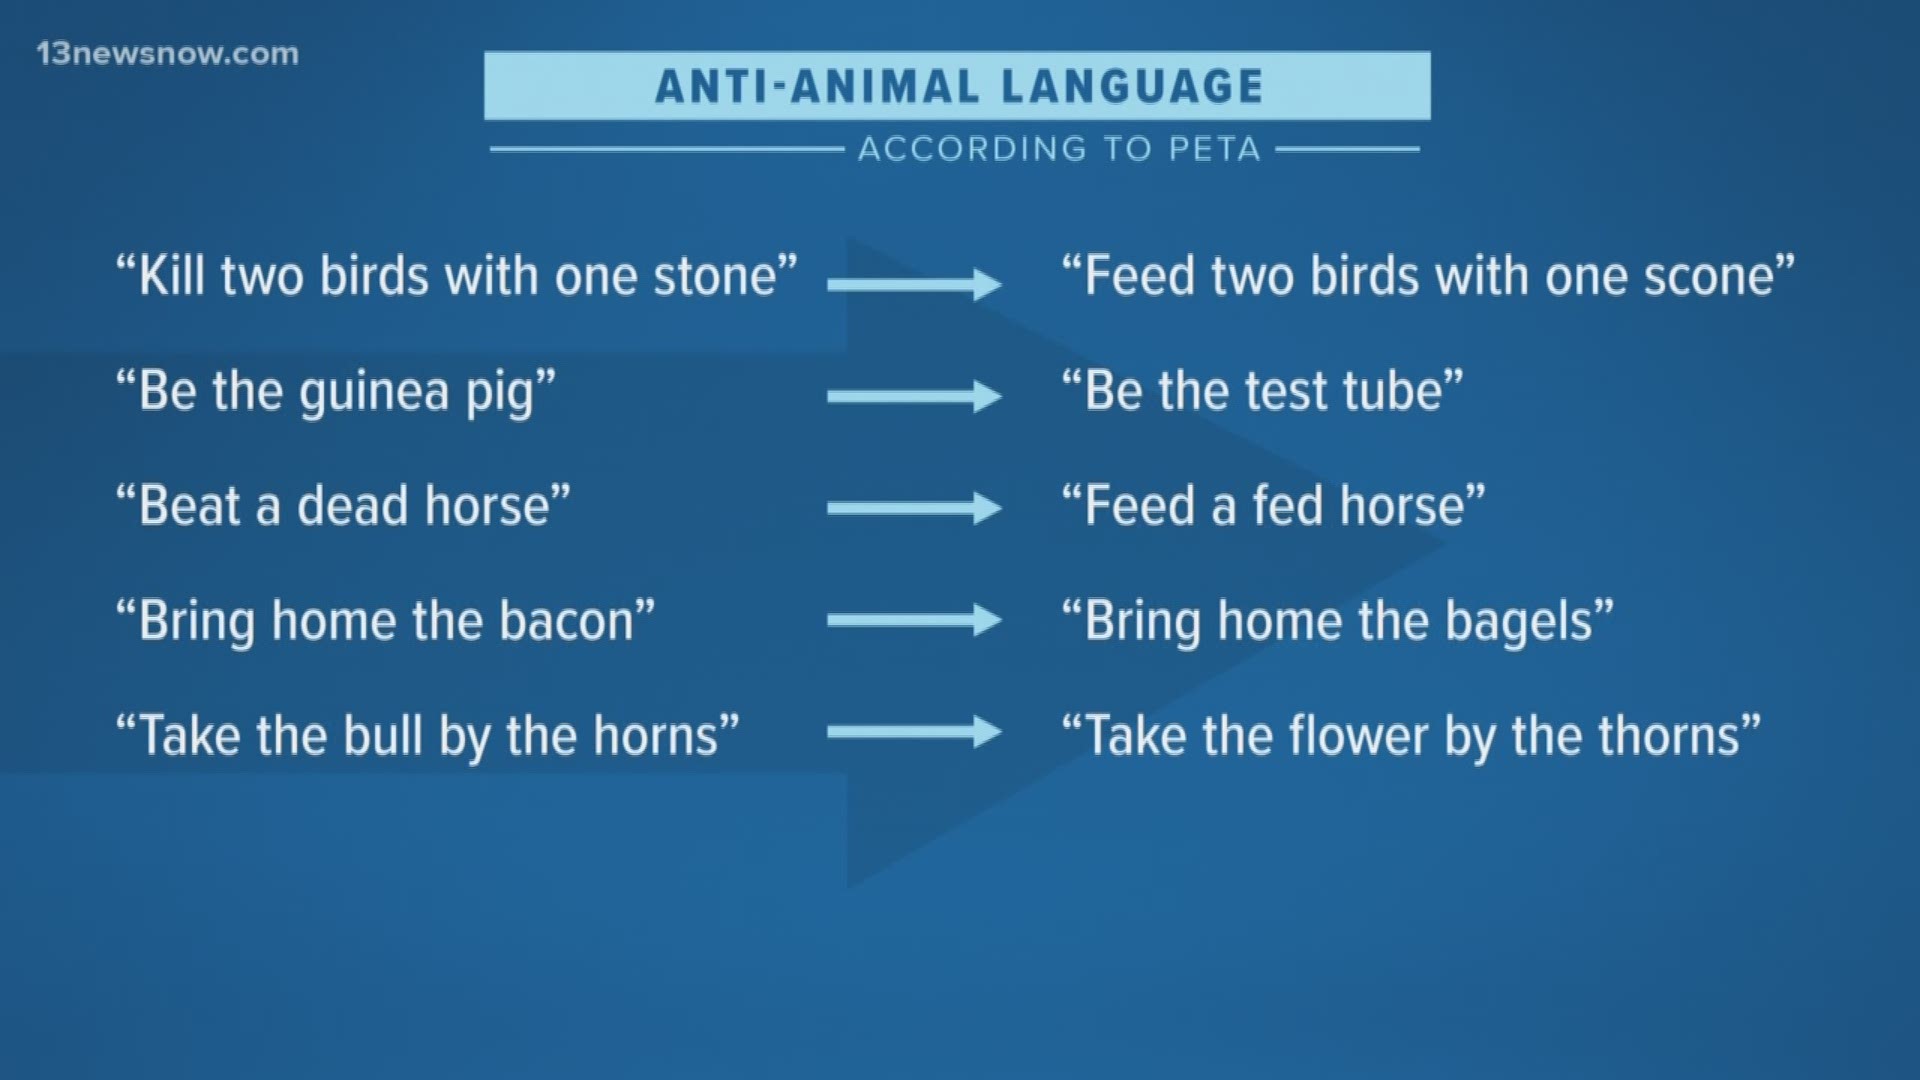 PETA is trying to get people to change the common phrases used in almost everyday language.